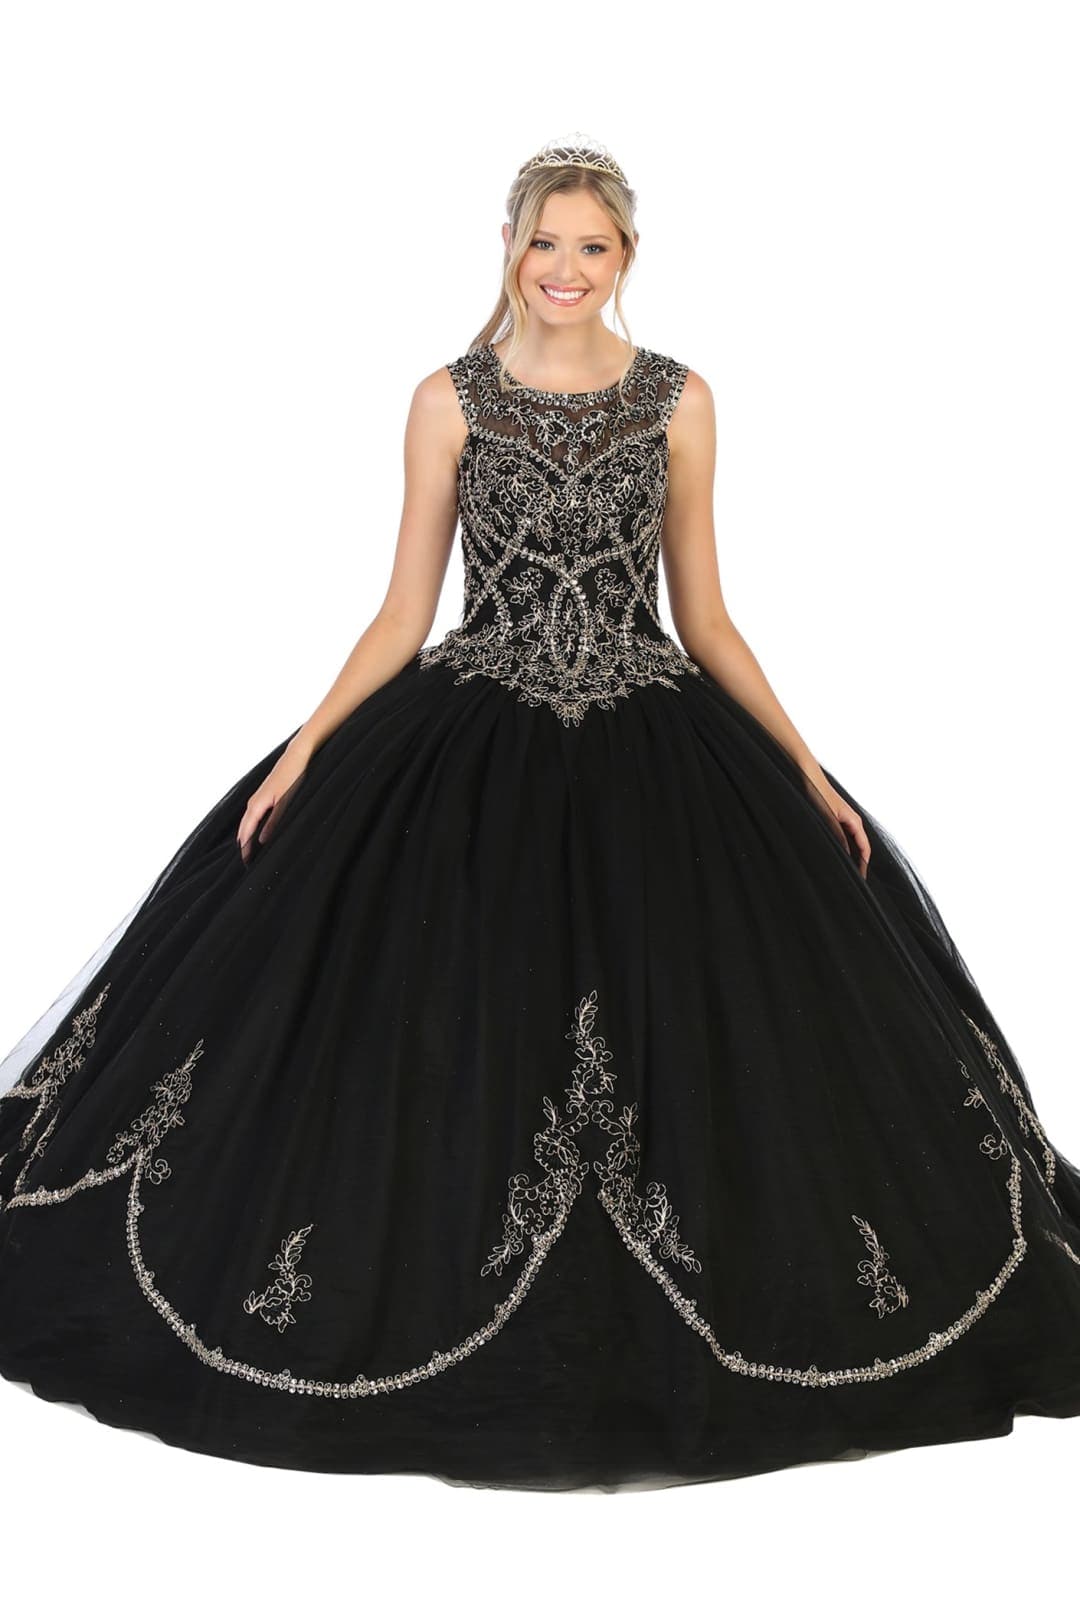 Enchanting Quinceanera Ball Gown - Black/Gold / 4